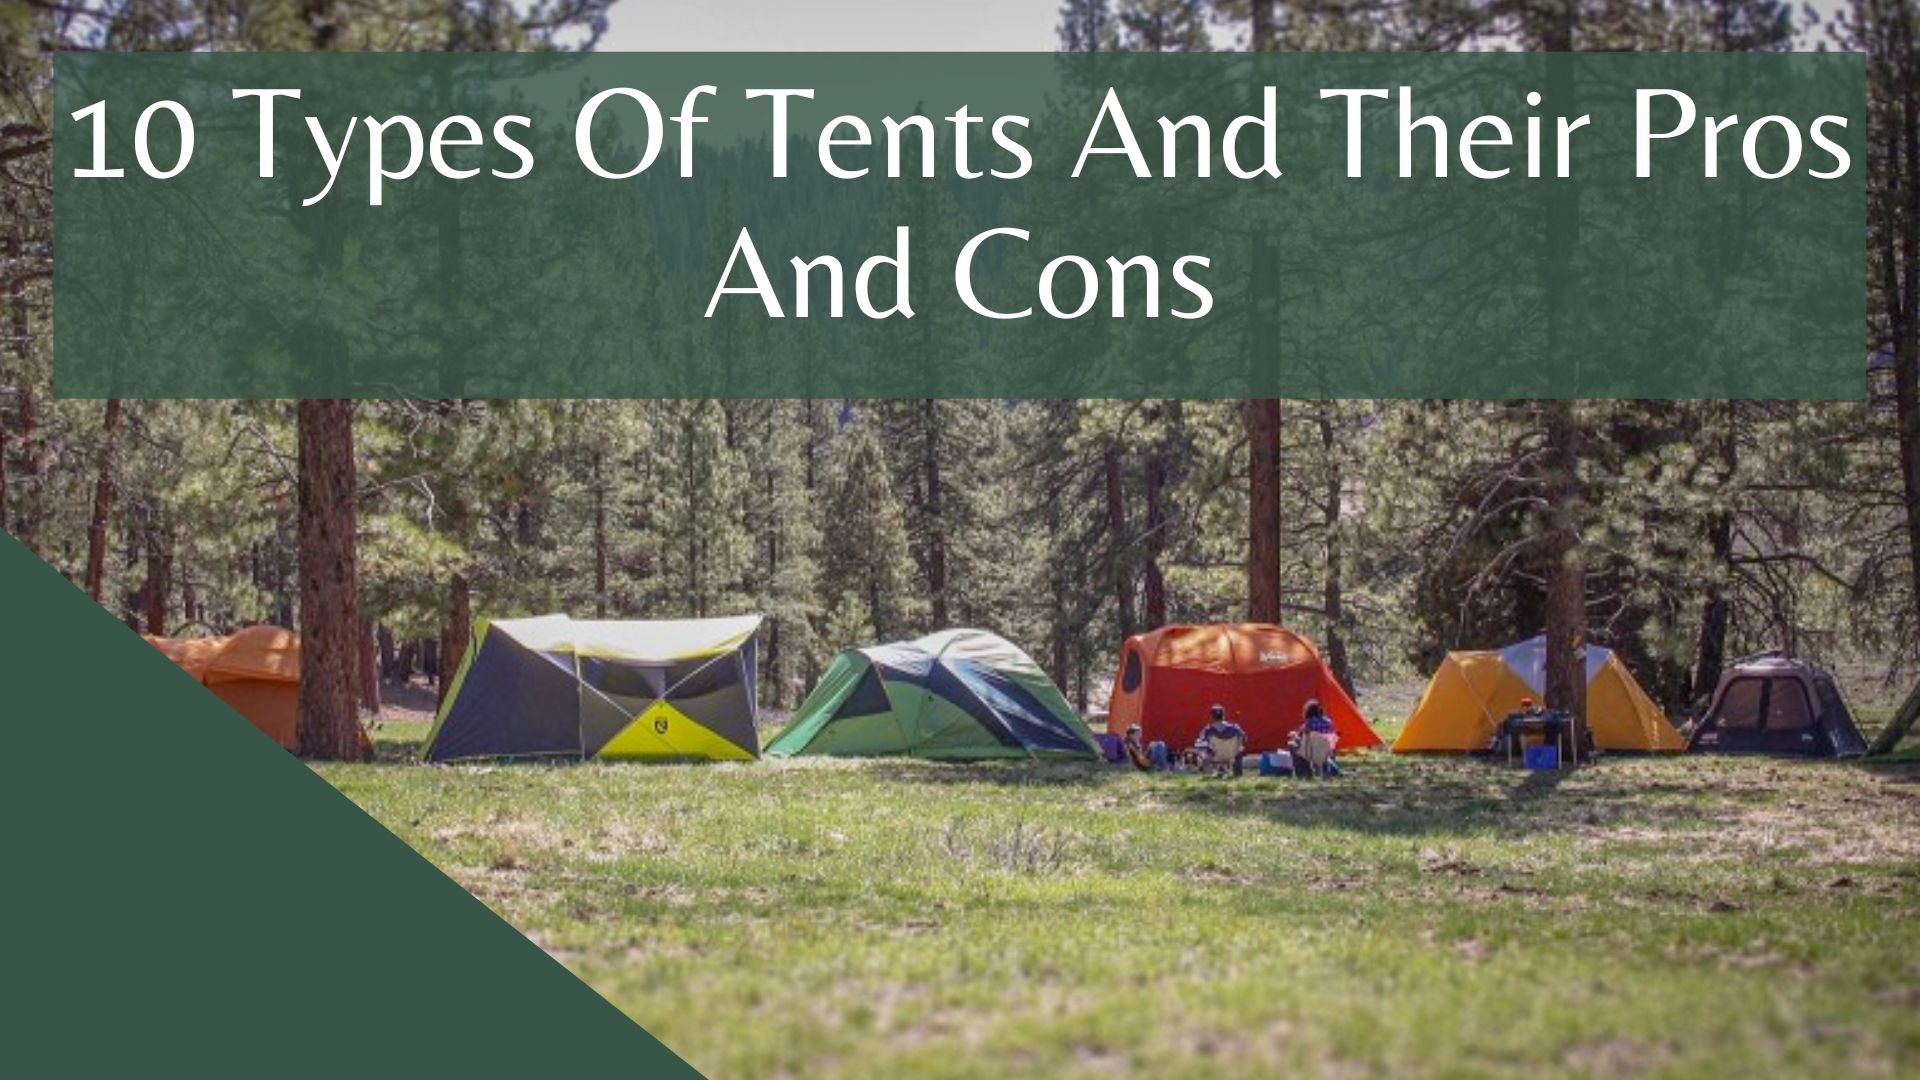 10 Types Of Tents And Their Pros And Cons